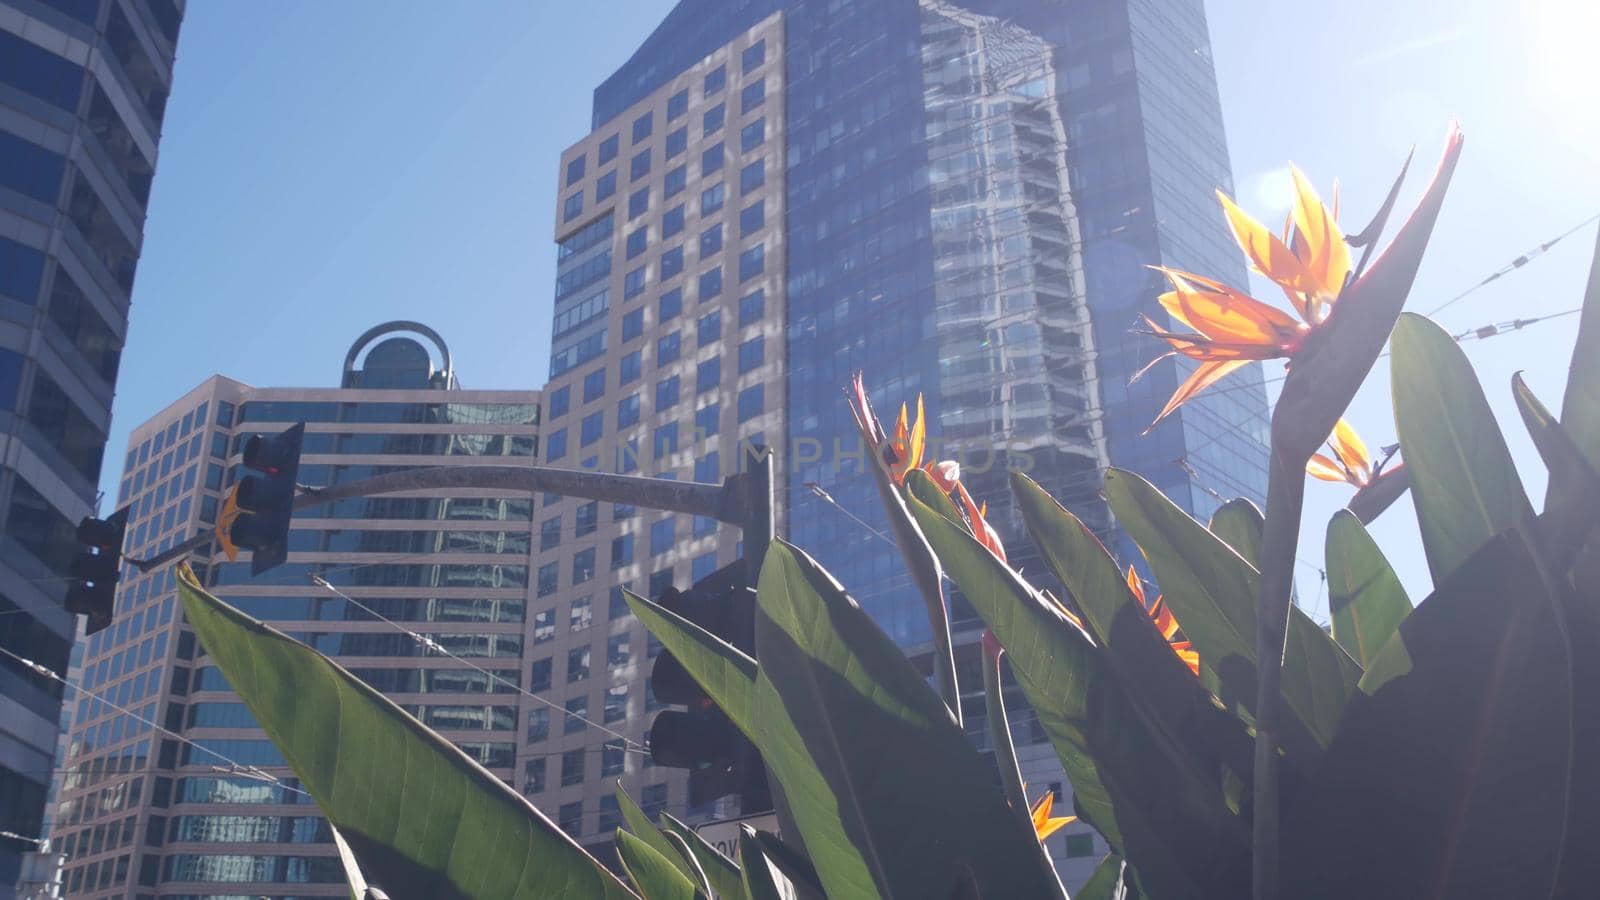 Highrise skyscrapers, strelitzia flowers in downtown, San Diego city street, California USA. Urban business tower facades on Broadway. Financial district architecture, garden or flowerbed. Low angle.